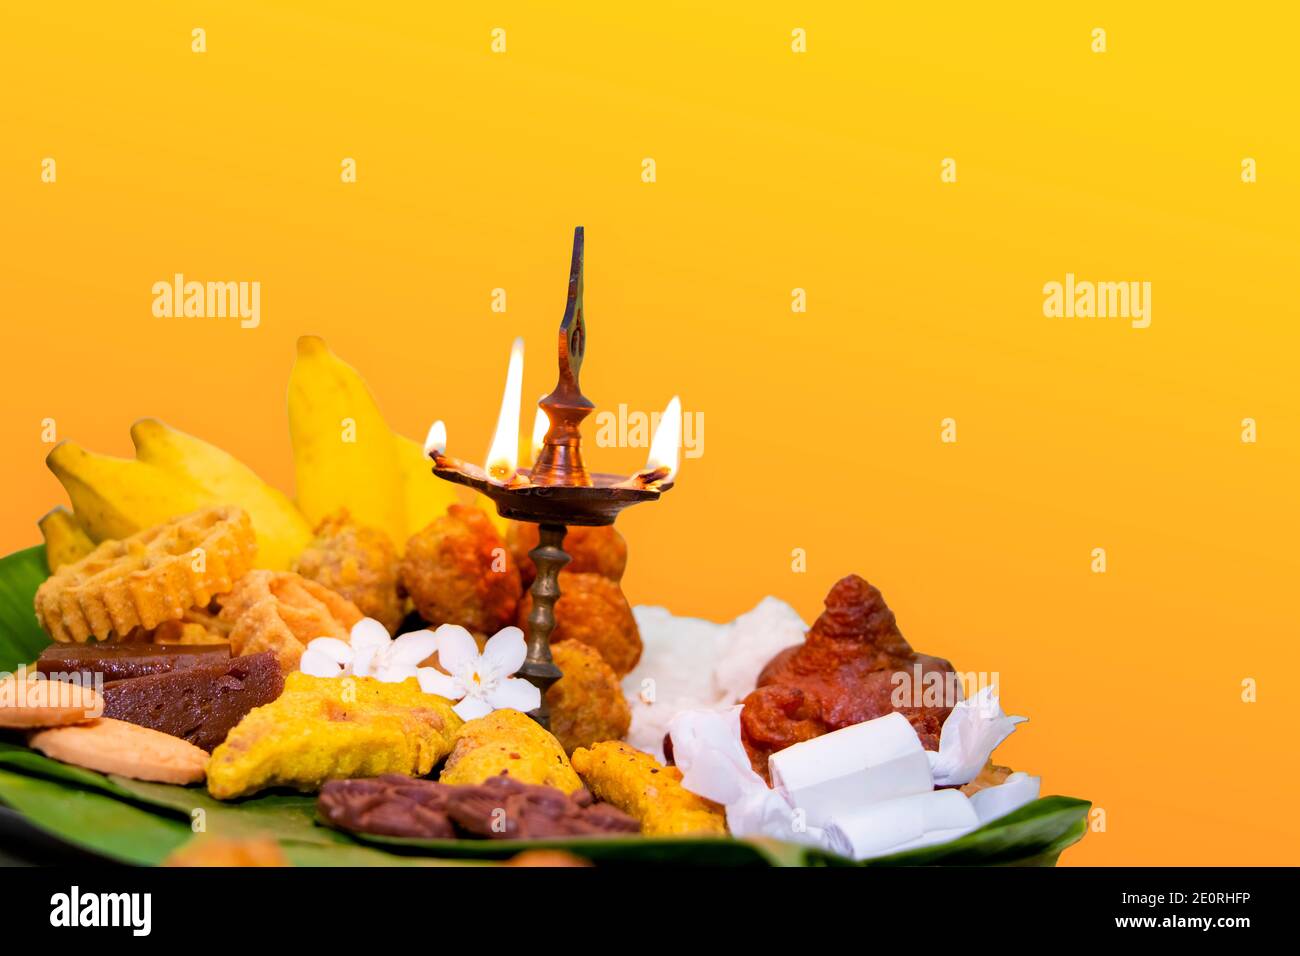 Sinhala Tamil New Year Traditional Foods with Oil lamp Stock Photo - Alamy